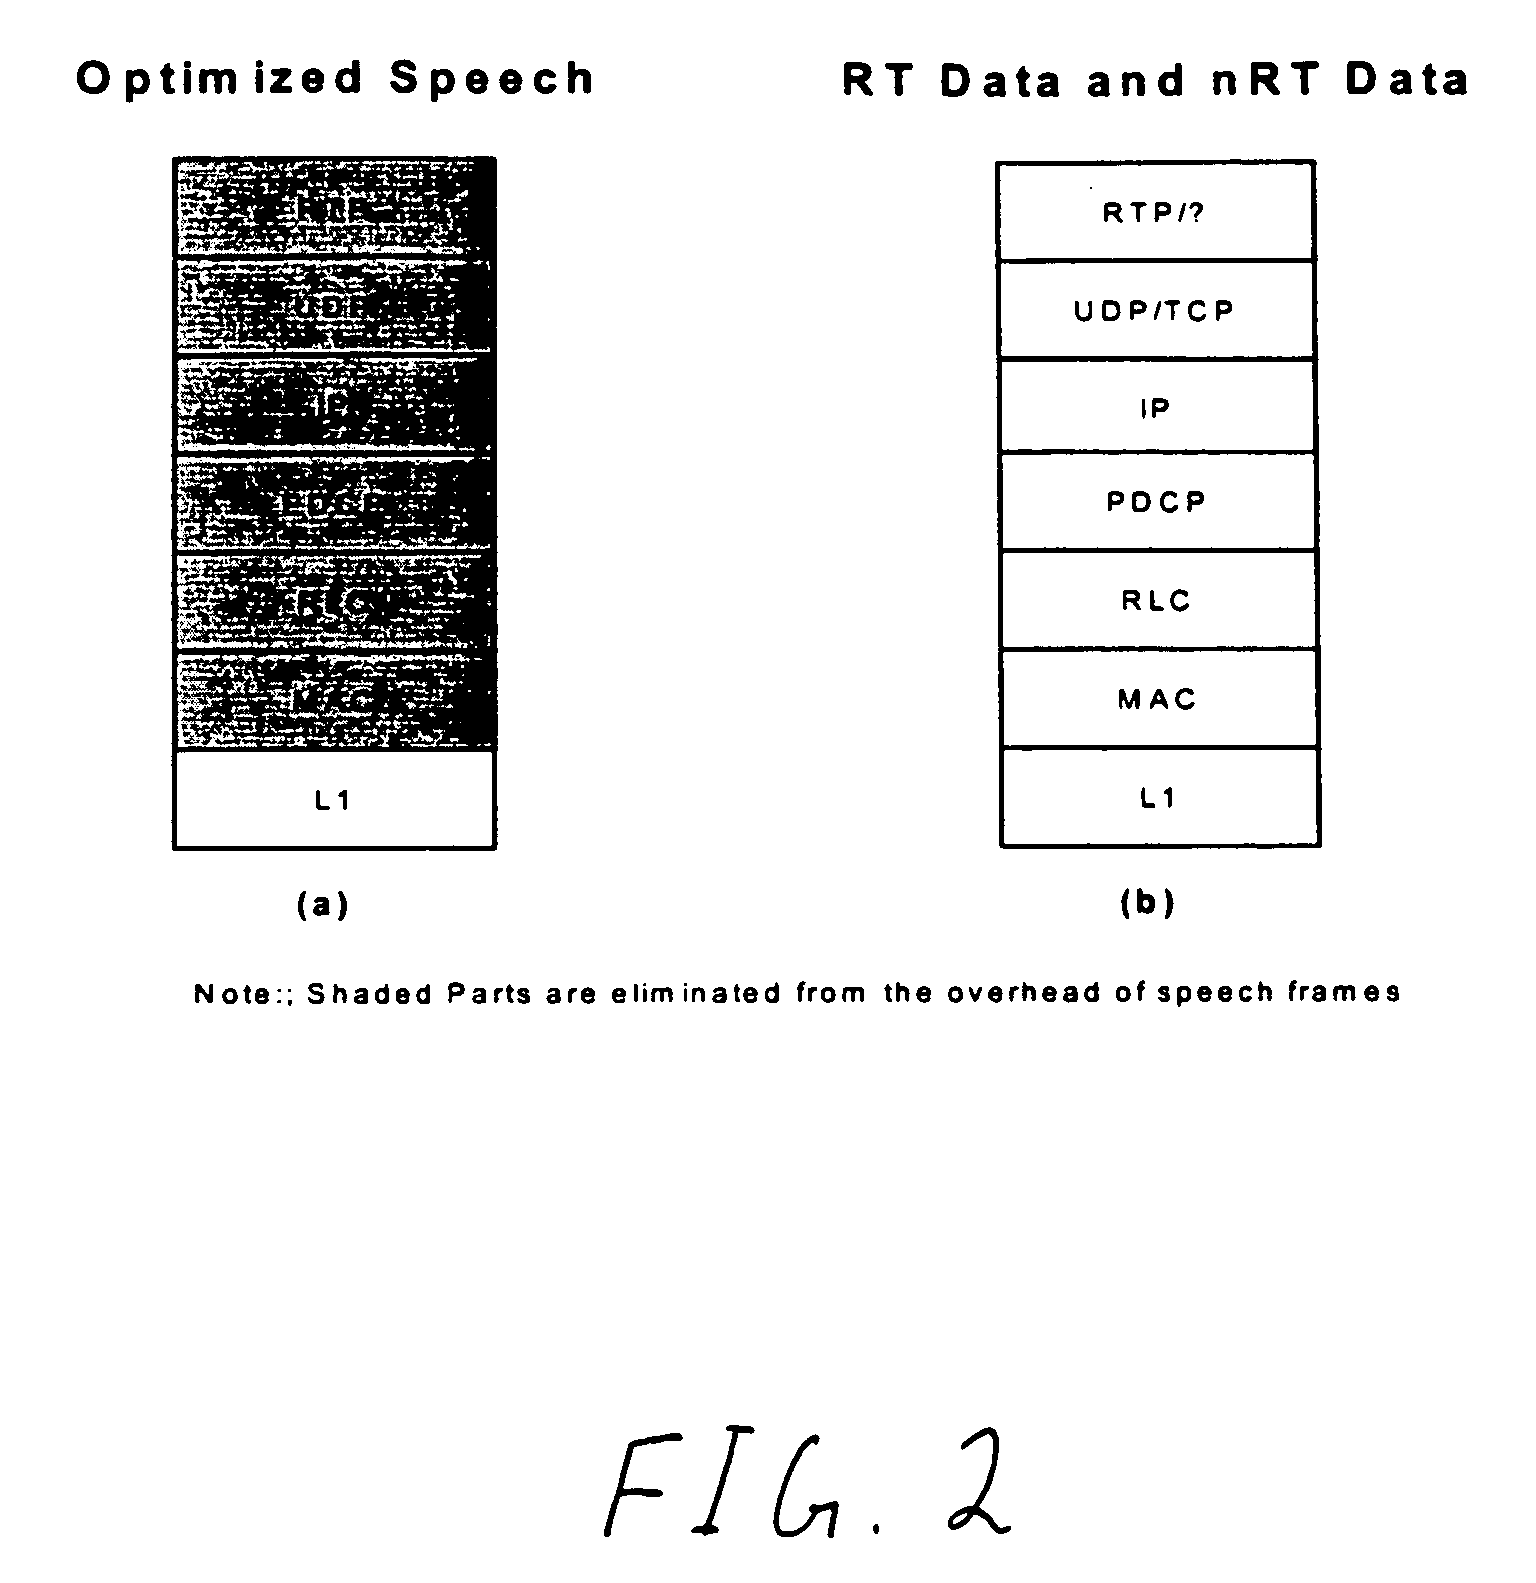 System for statistically multiplexing real-time and non-real-time voice and data traffic in a wireless system